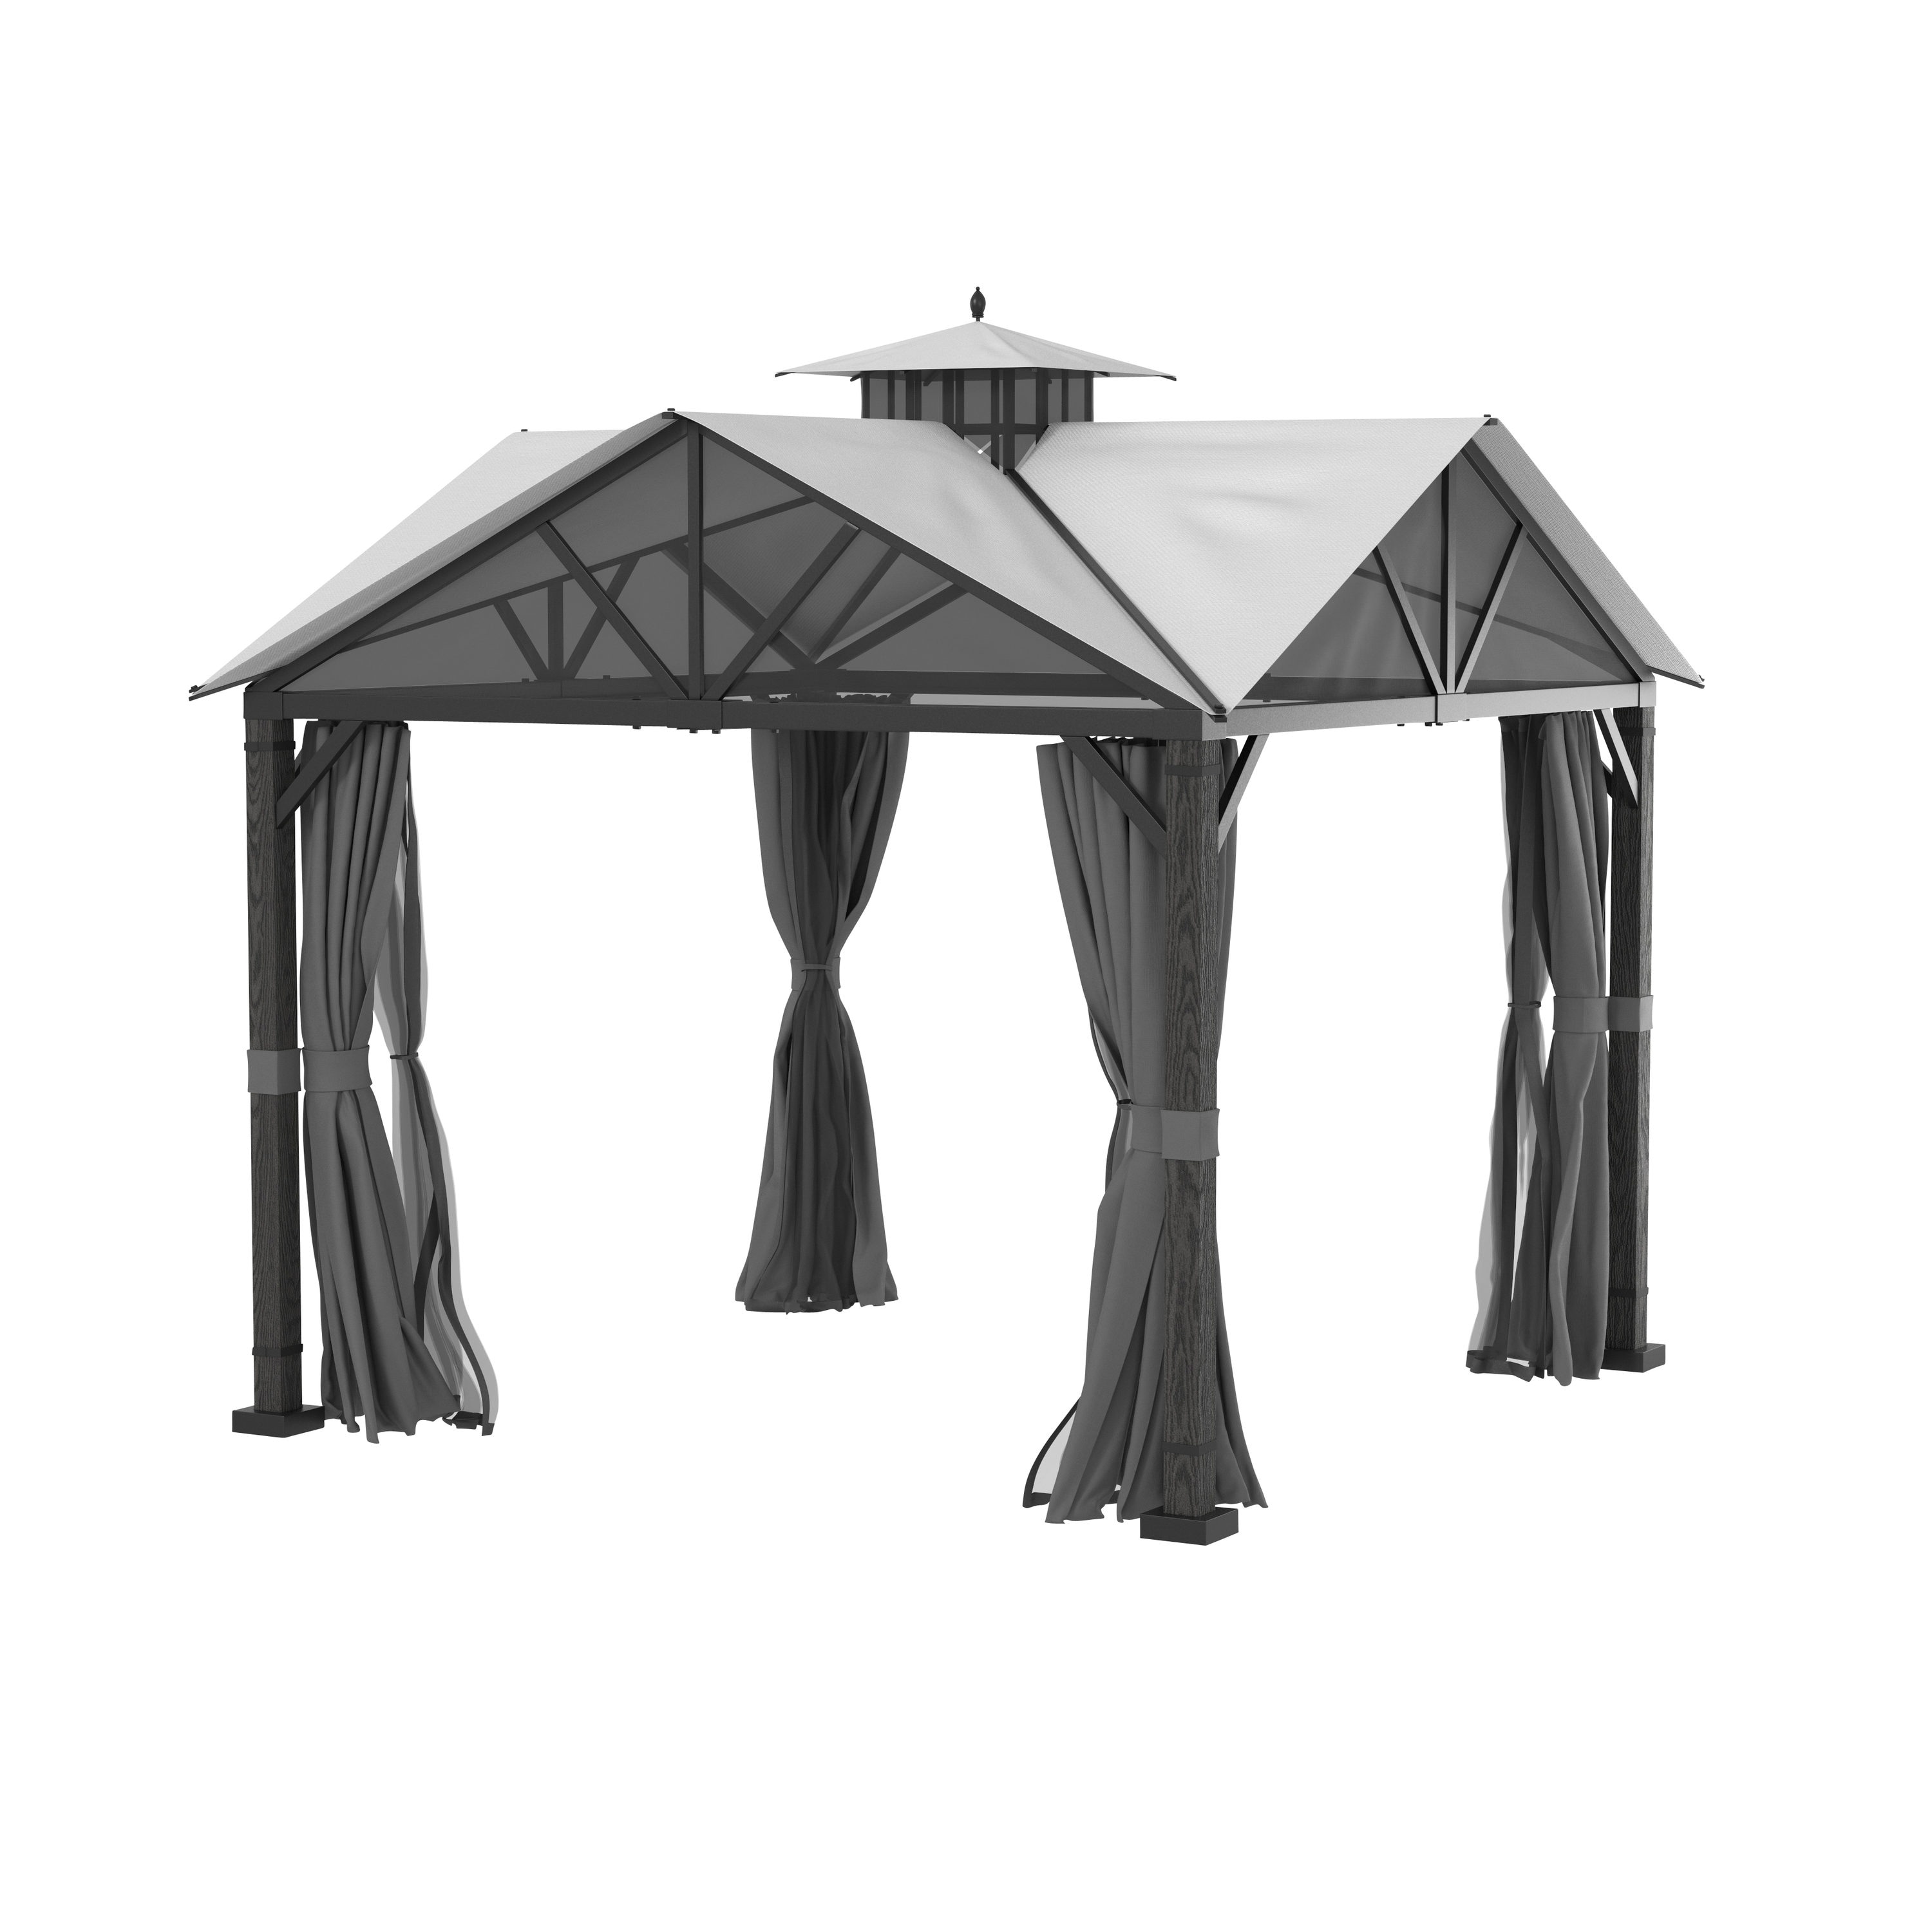 Style Selections 10.72-ft x 10.72-ft Metal Square Screened Semi-permanent Gazebo on Sale At Lowe's